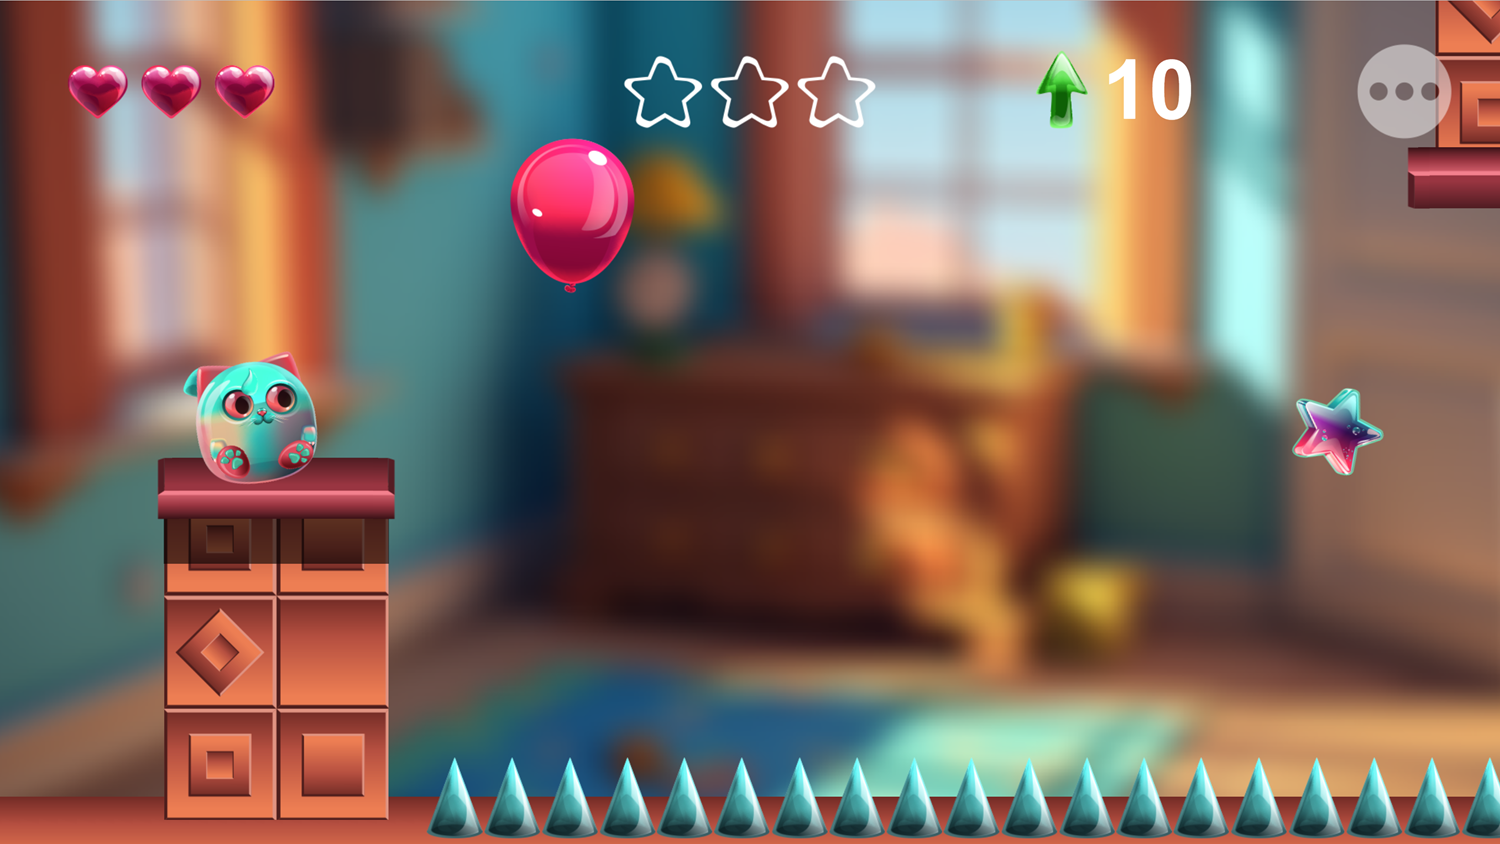 Fluffy Jelly Cat Game Level With a Balloon Screenshot.